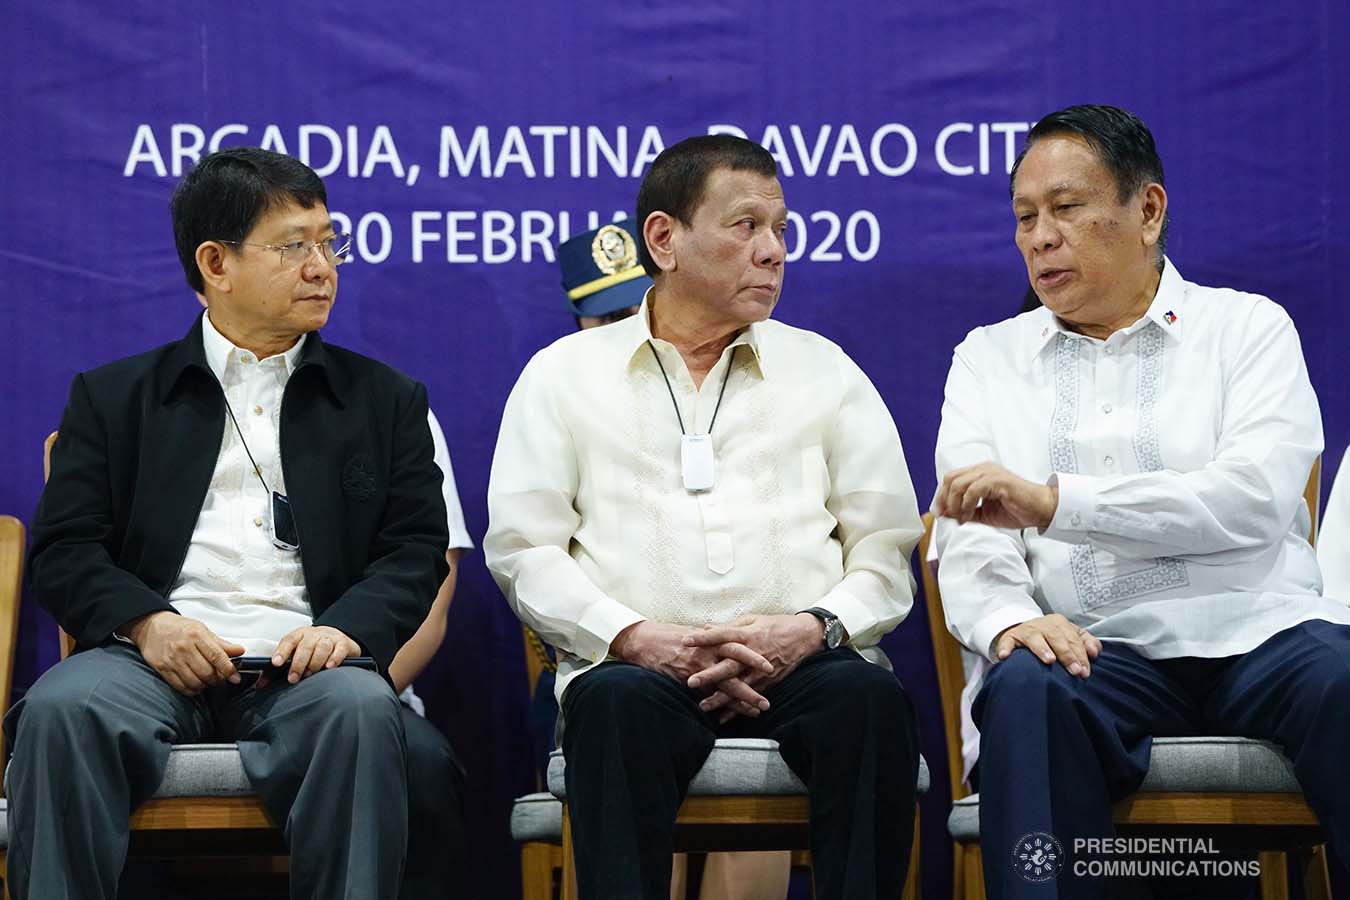 President Rodrigo Roa Duterte chats with Interior and Local Government Secretary Eduardo Año and Philippine Public Safety College President Ricardo De Leon on the sidelines of the joint graduation ceremony of Public Safety Officers Basic Course Class 2019-07 and Advance Course Class 2019-18 at the Arcadia Active Lifestyle Center in Davao City on February 20, 2020. JOEY DALUMPINES/PRESIDENTIAL PHOTO